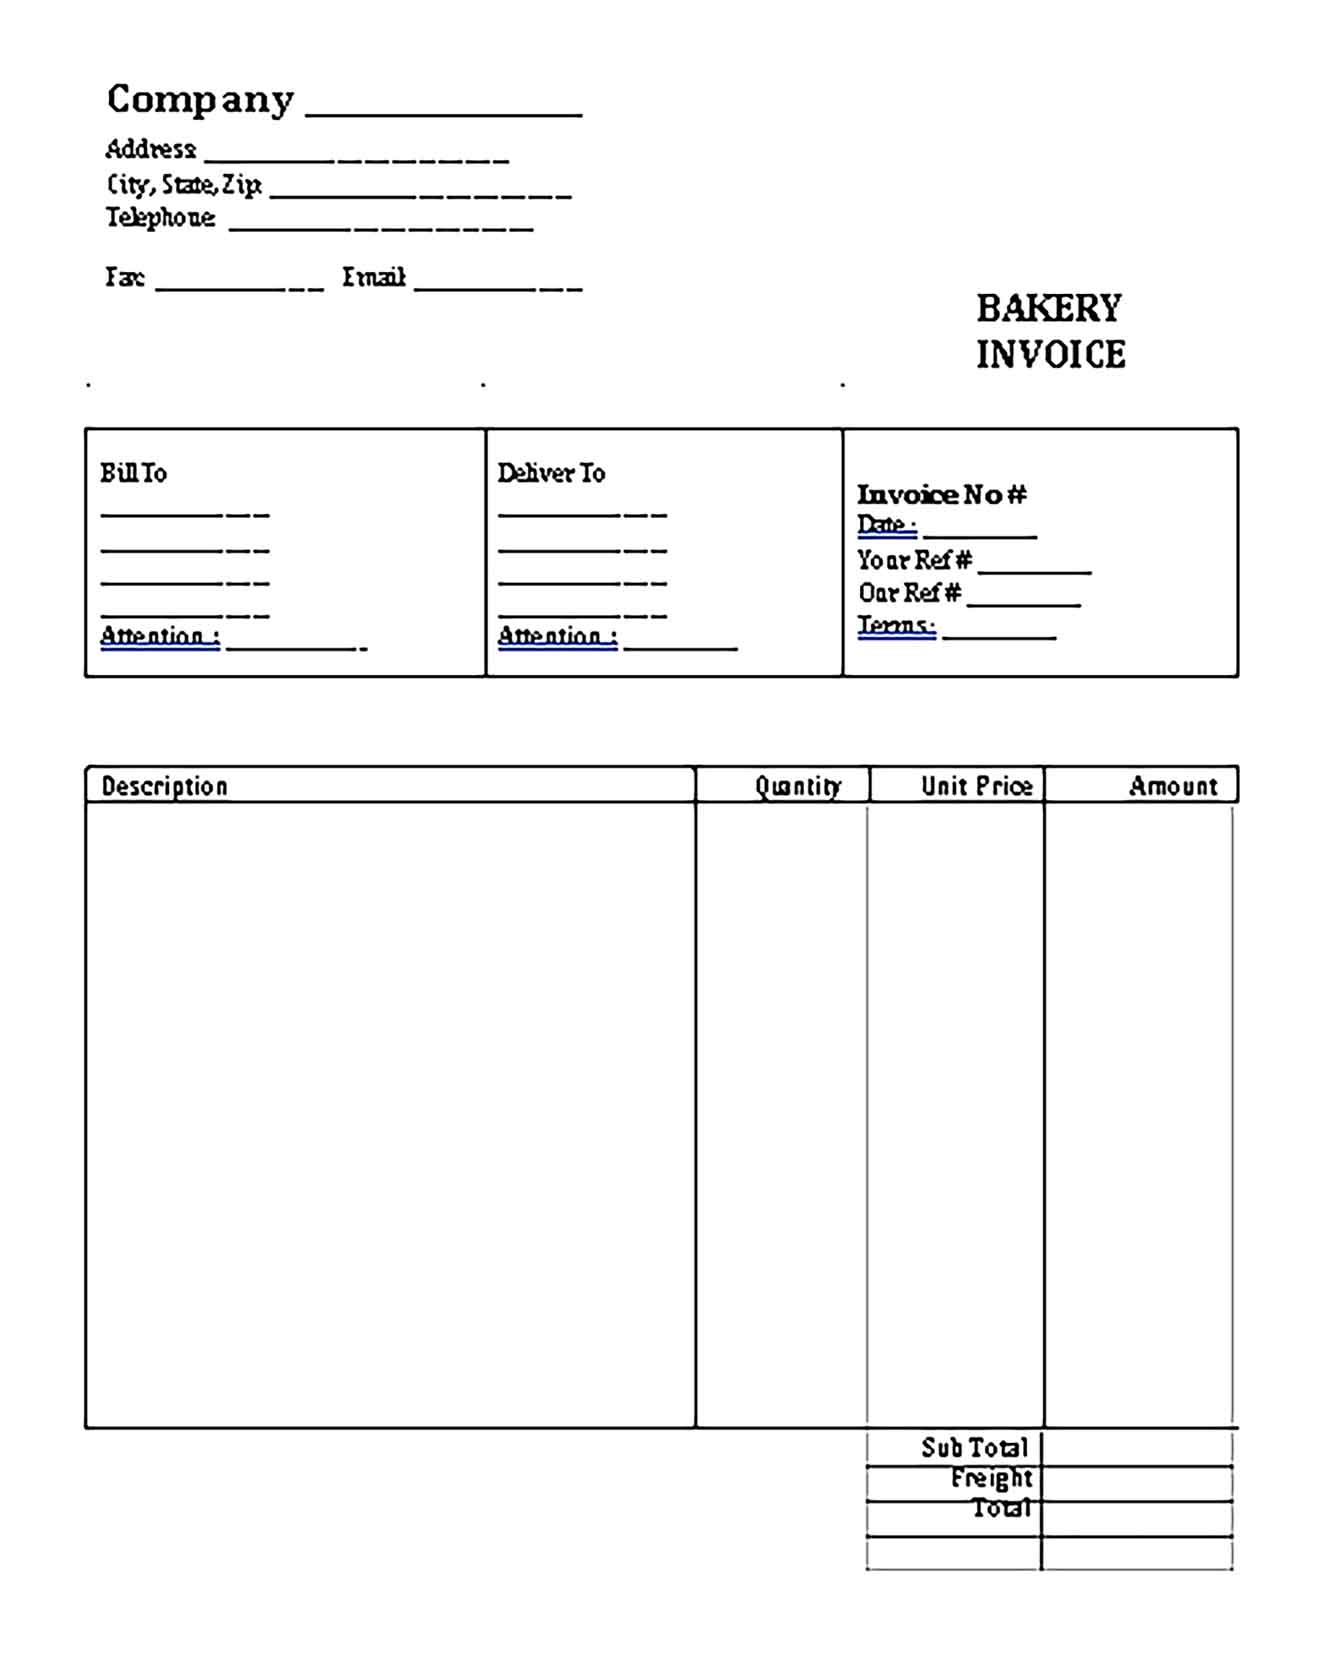 Sample Templates Simple Bakery Invoice 1 1